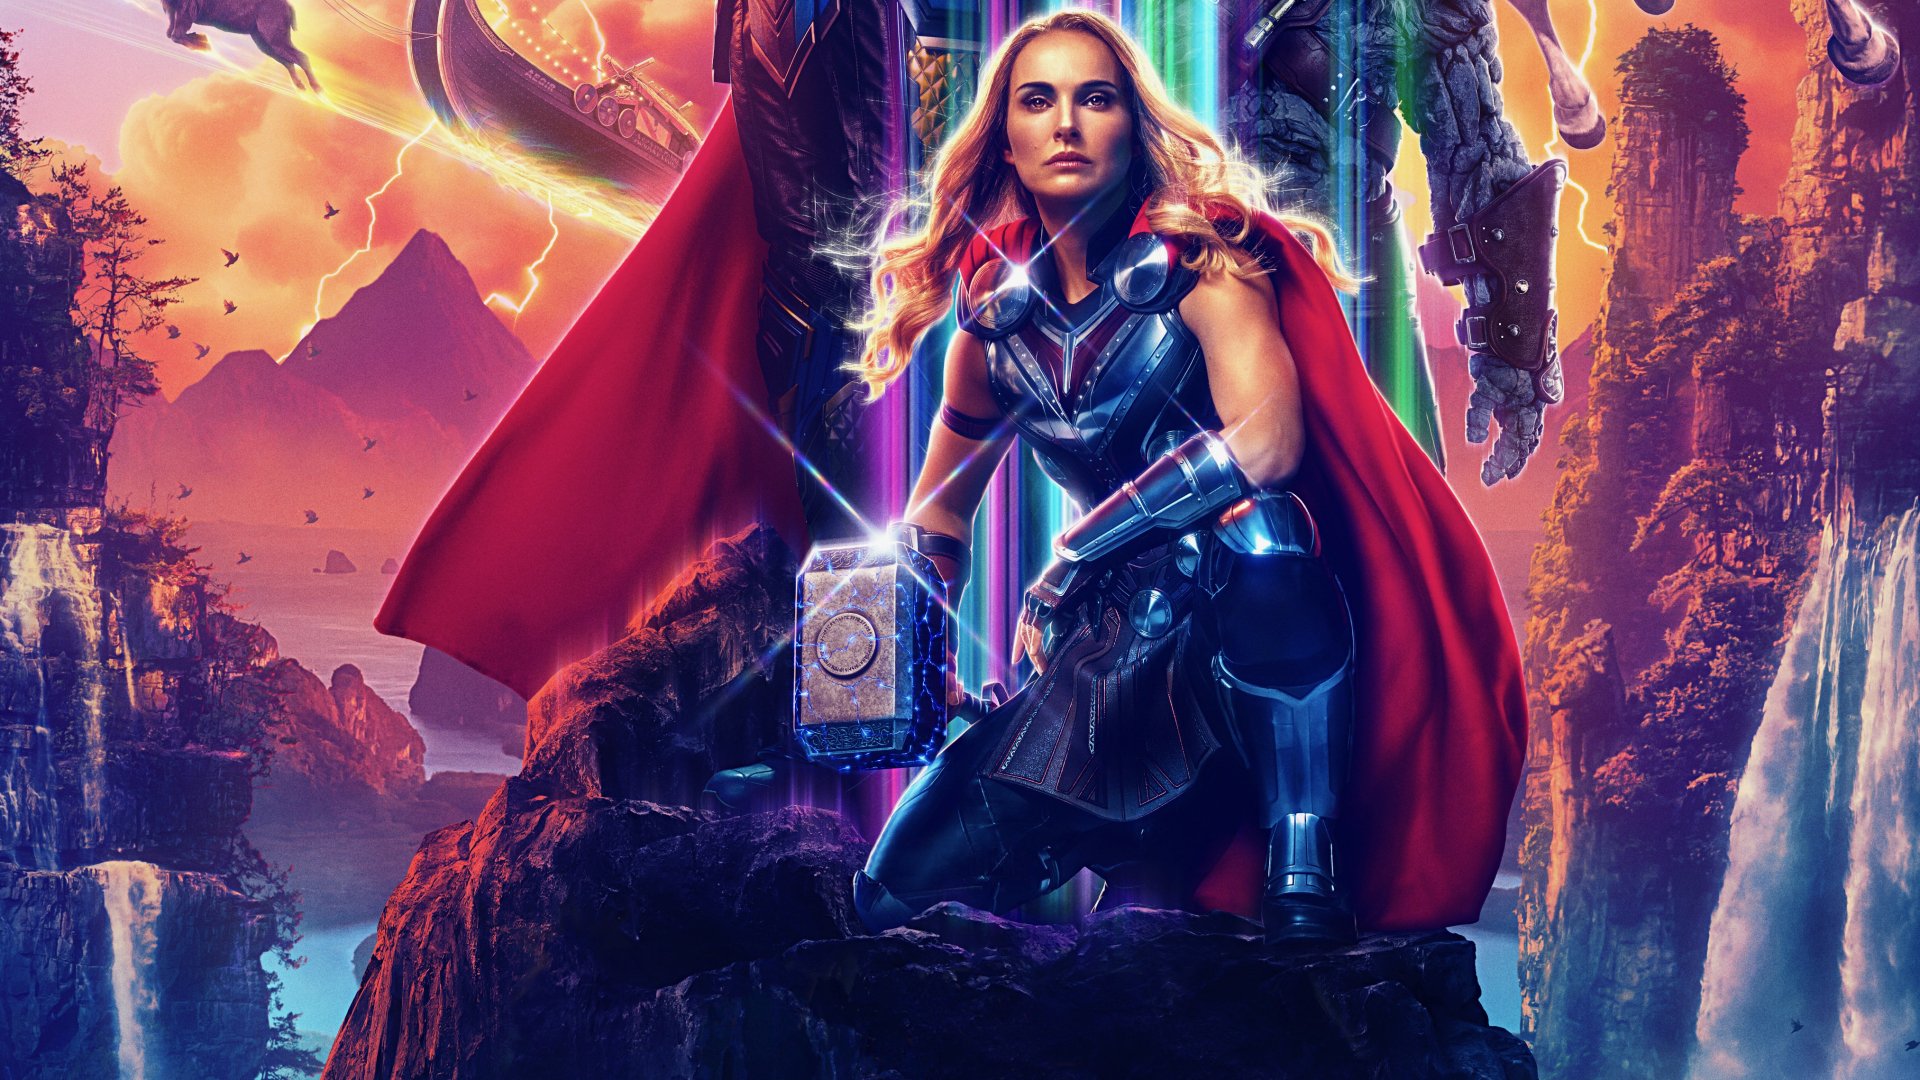 Download Jane Foster Natalie Portman Lady Thor Movie Thor: Love And Thunder  4k Ultra HD Wallpaper